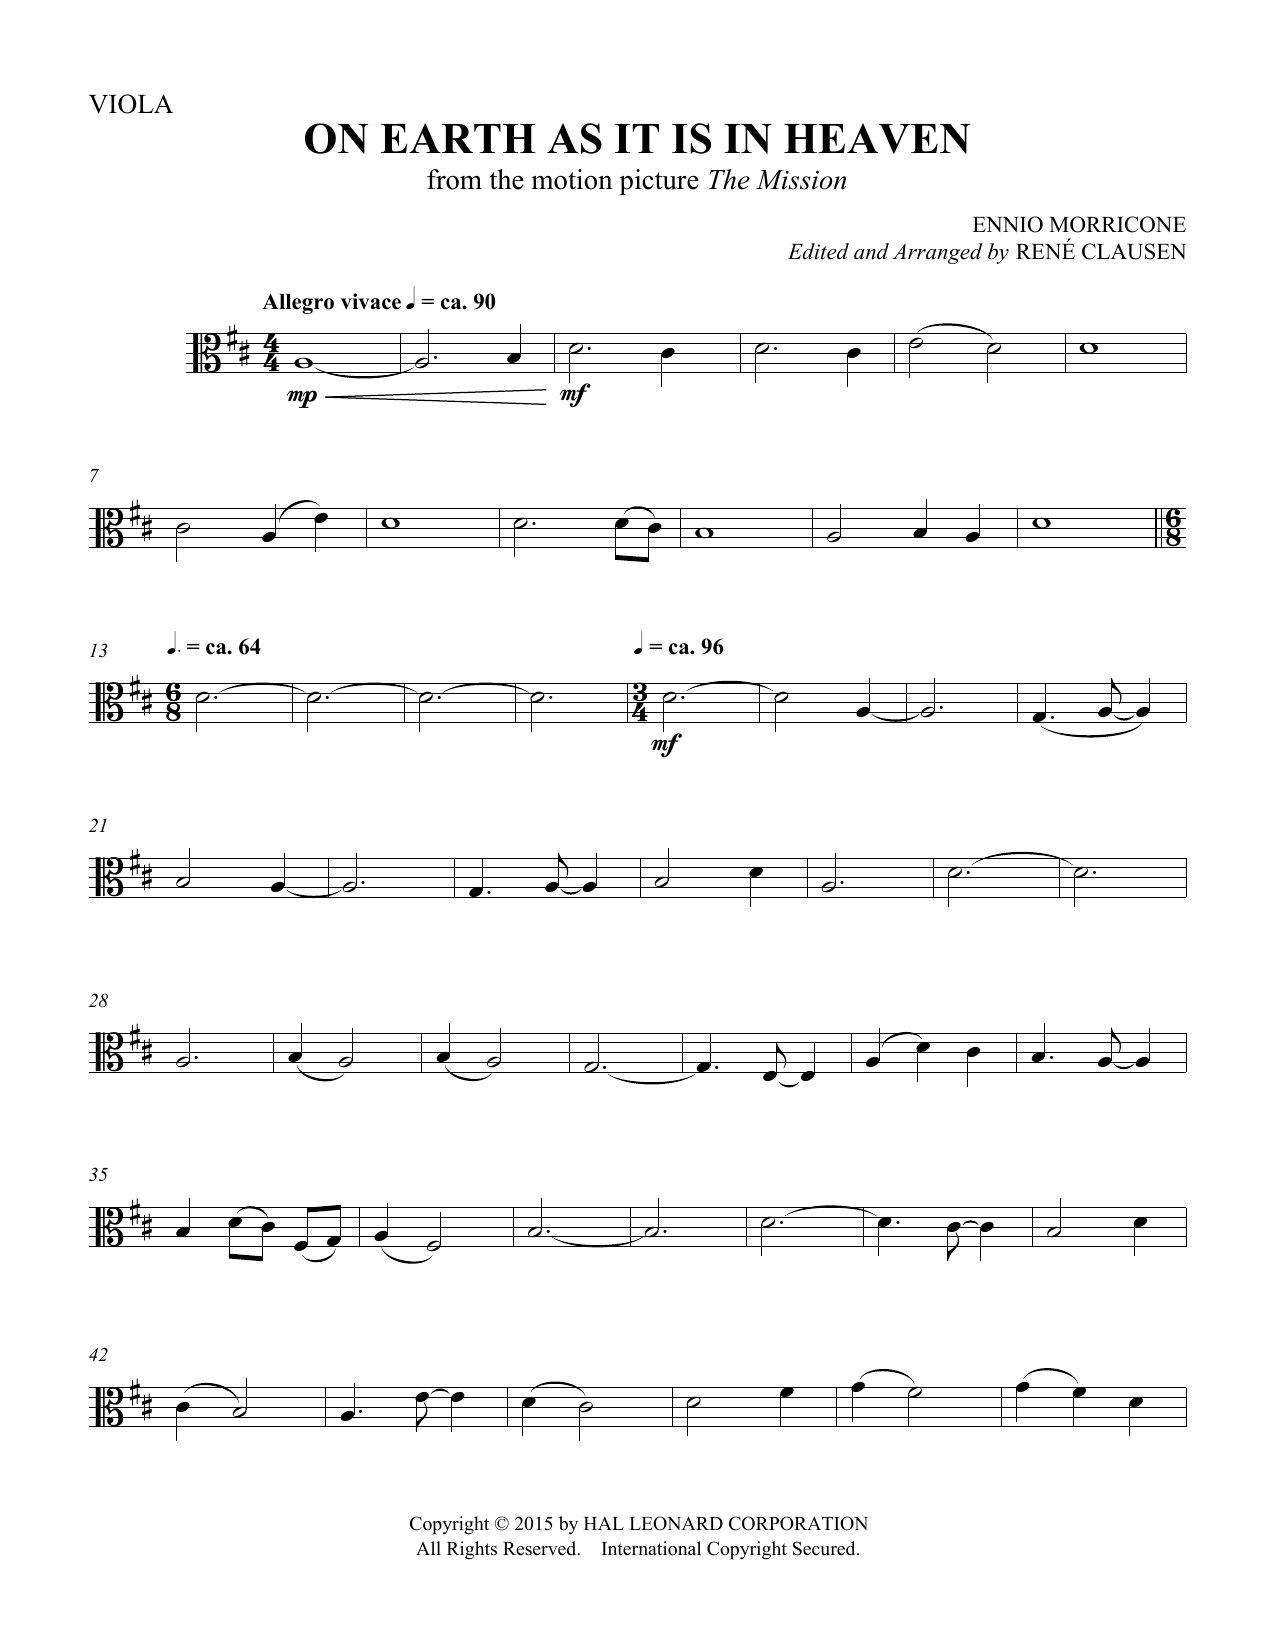 Rene Clausen On Earth As It Is In Heaven - Viola sheet music notes and chords. Download Printable PDF.